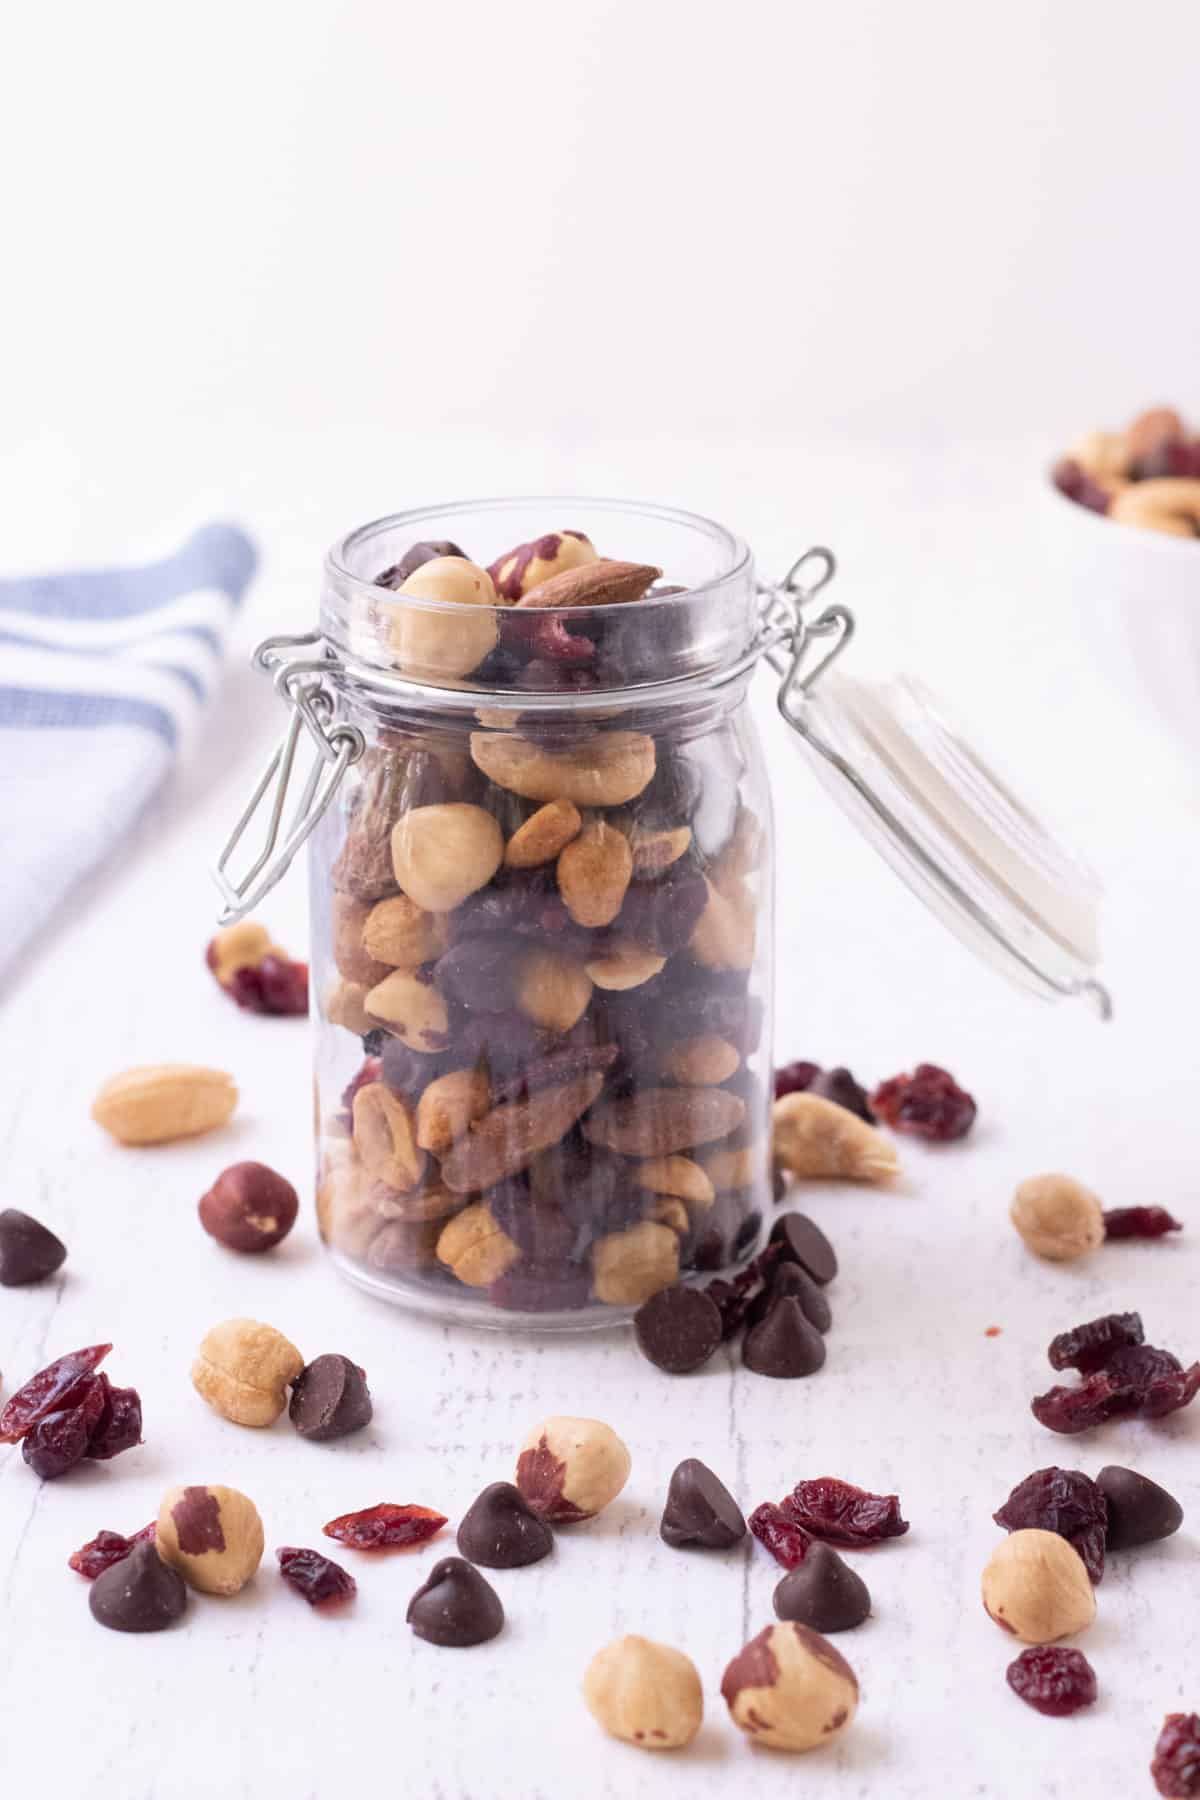 Glass jar with open lid and cherry and chocolate trail mix inside and sprinkled around with blue and white towel in upper left background.